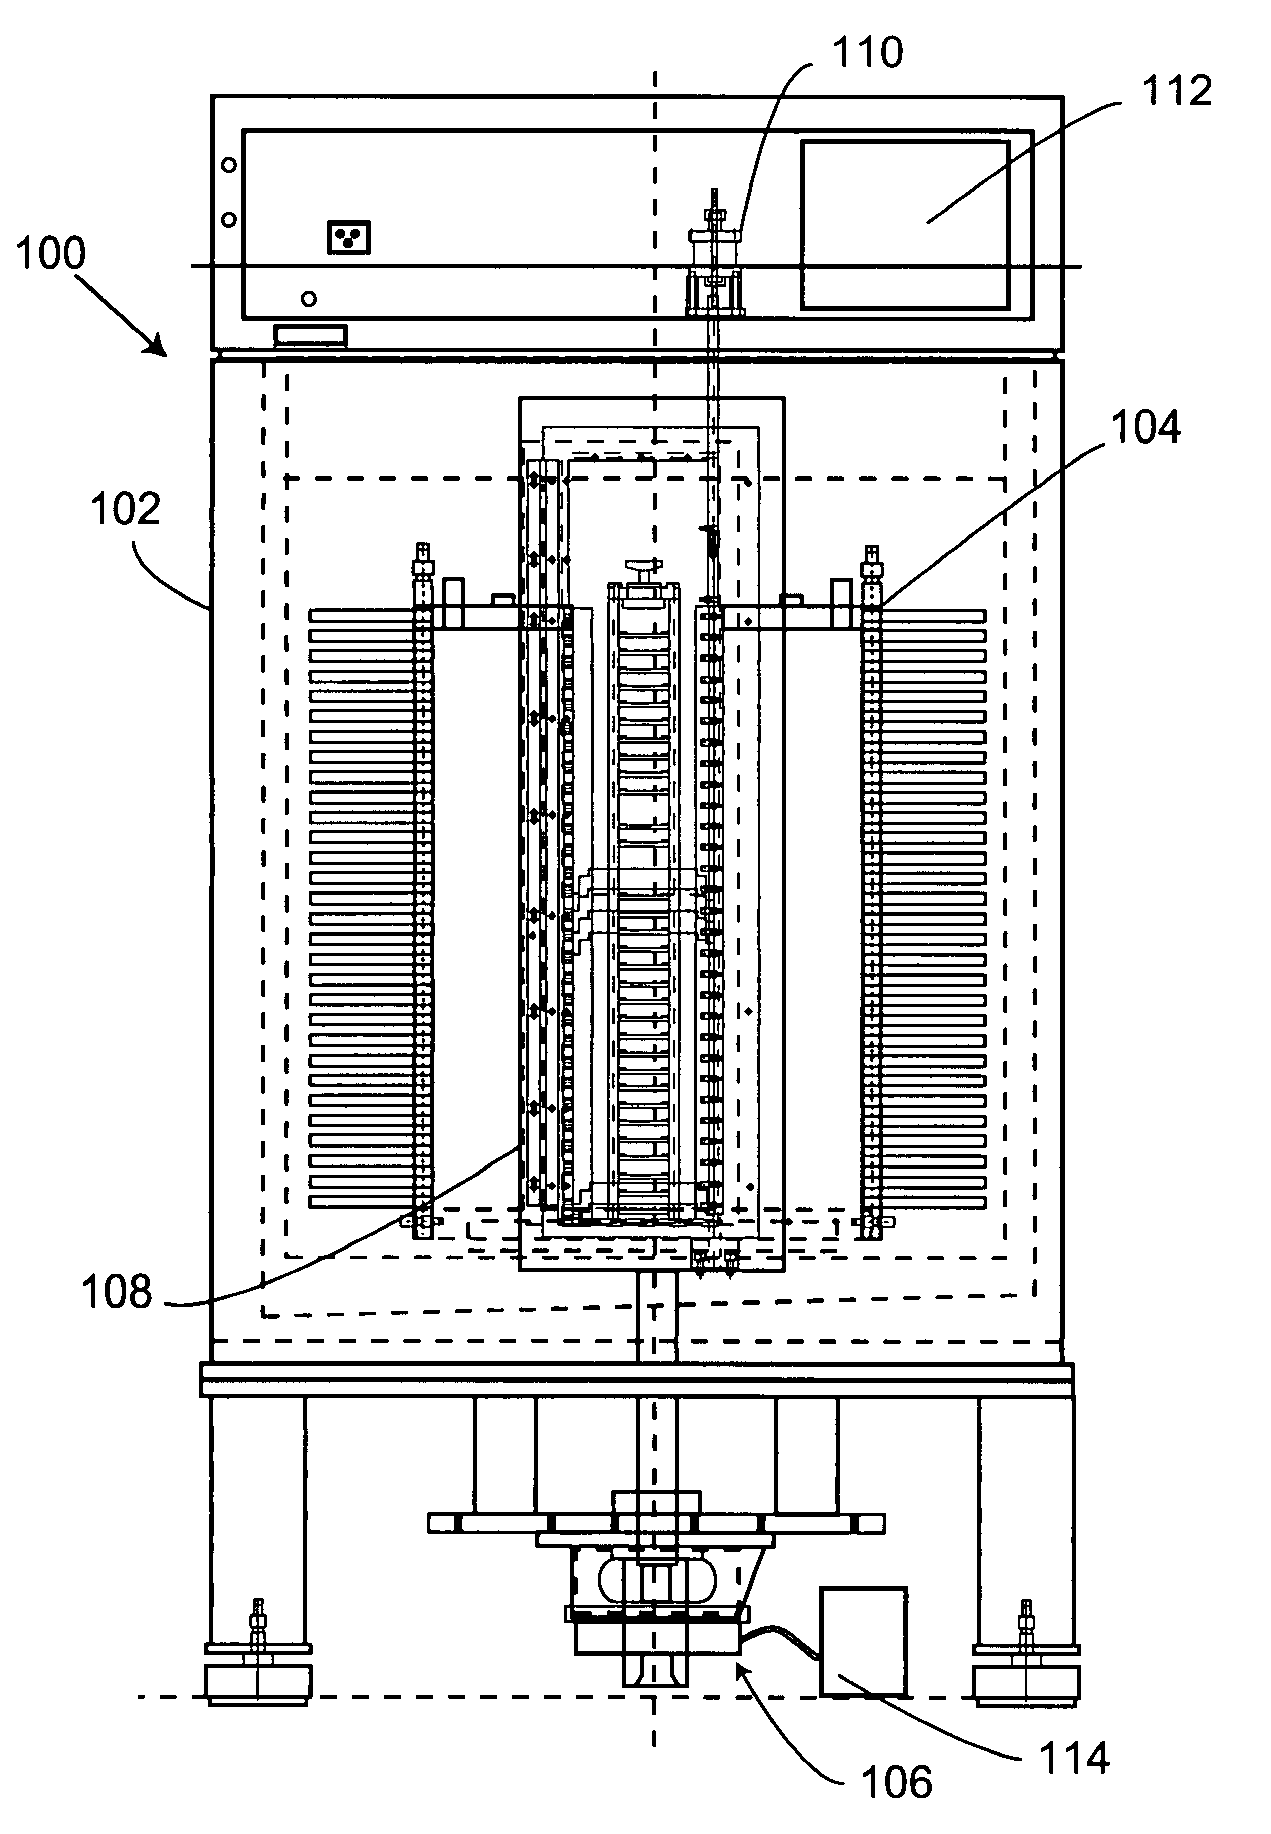 High throughput incubation devices and systems